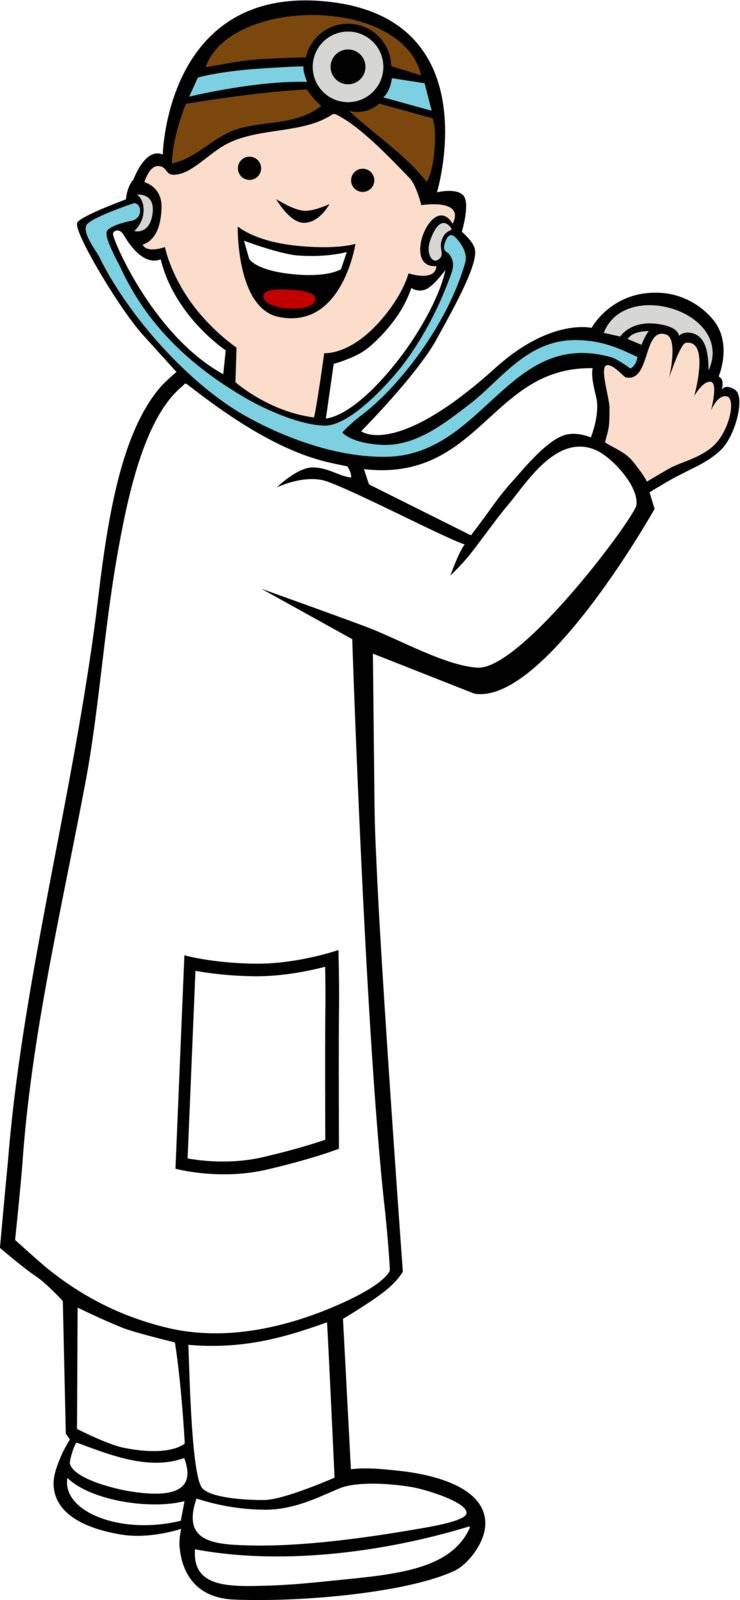 Doctor with stethoscope isolated on a white background.